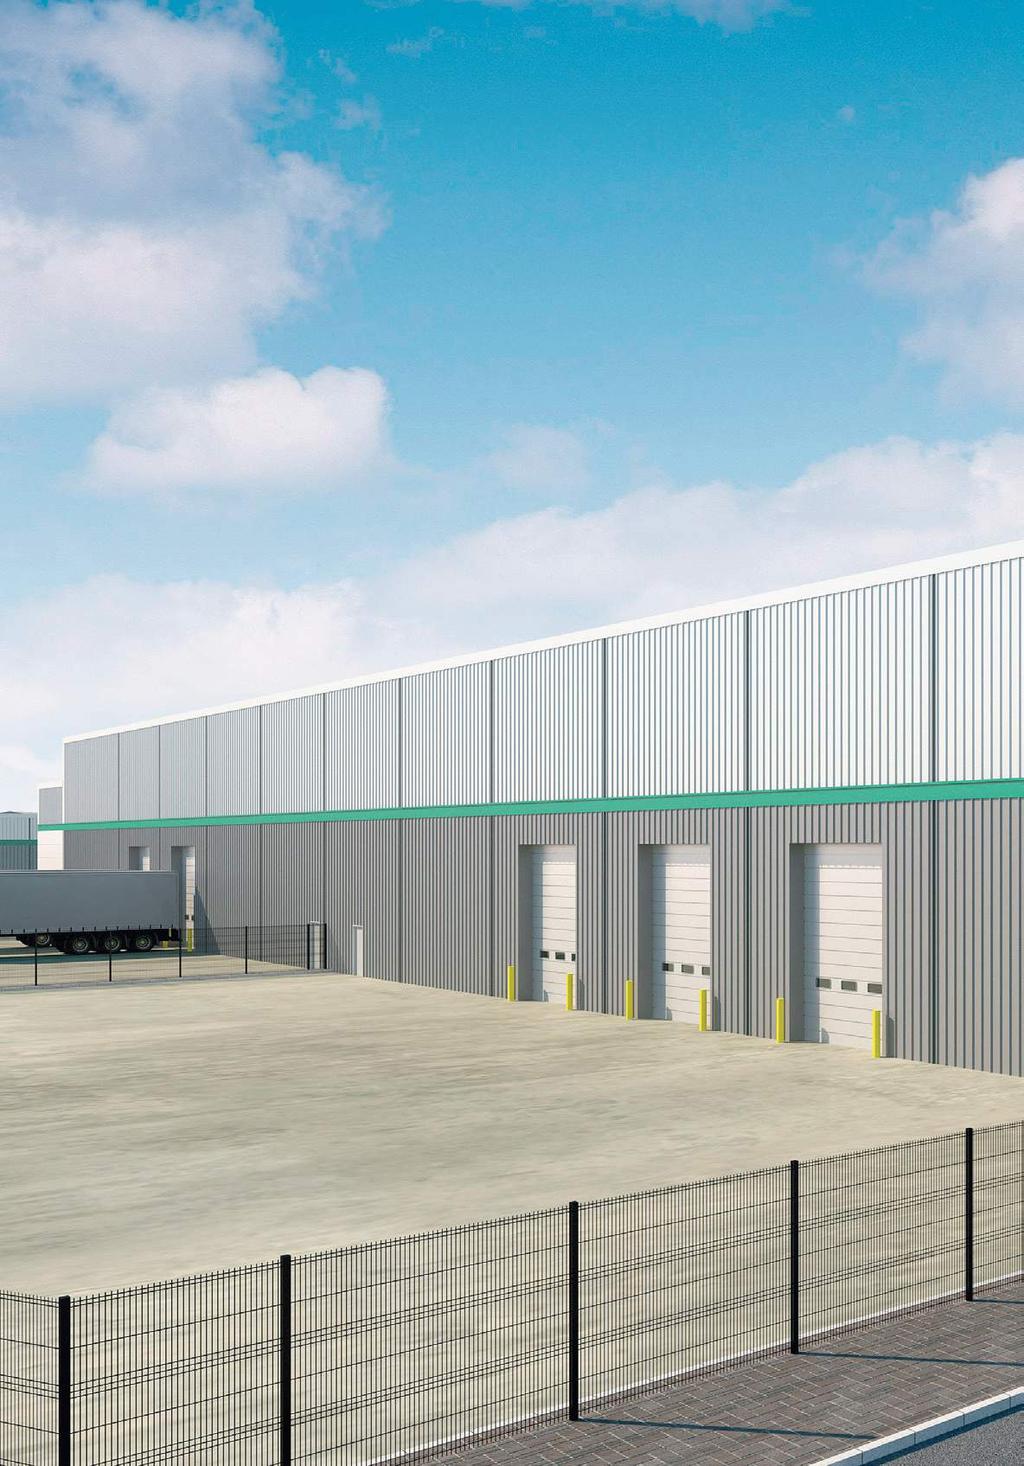 PROLOGIS GRADE A INDUSTRIAL BUILDINGS IN THE HEART OF WEST LONDON 2,87-52,719 SQ FT Well-established industrial location New grade A buildings with industry leading specification Fast access to the